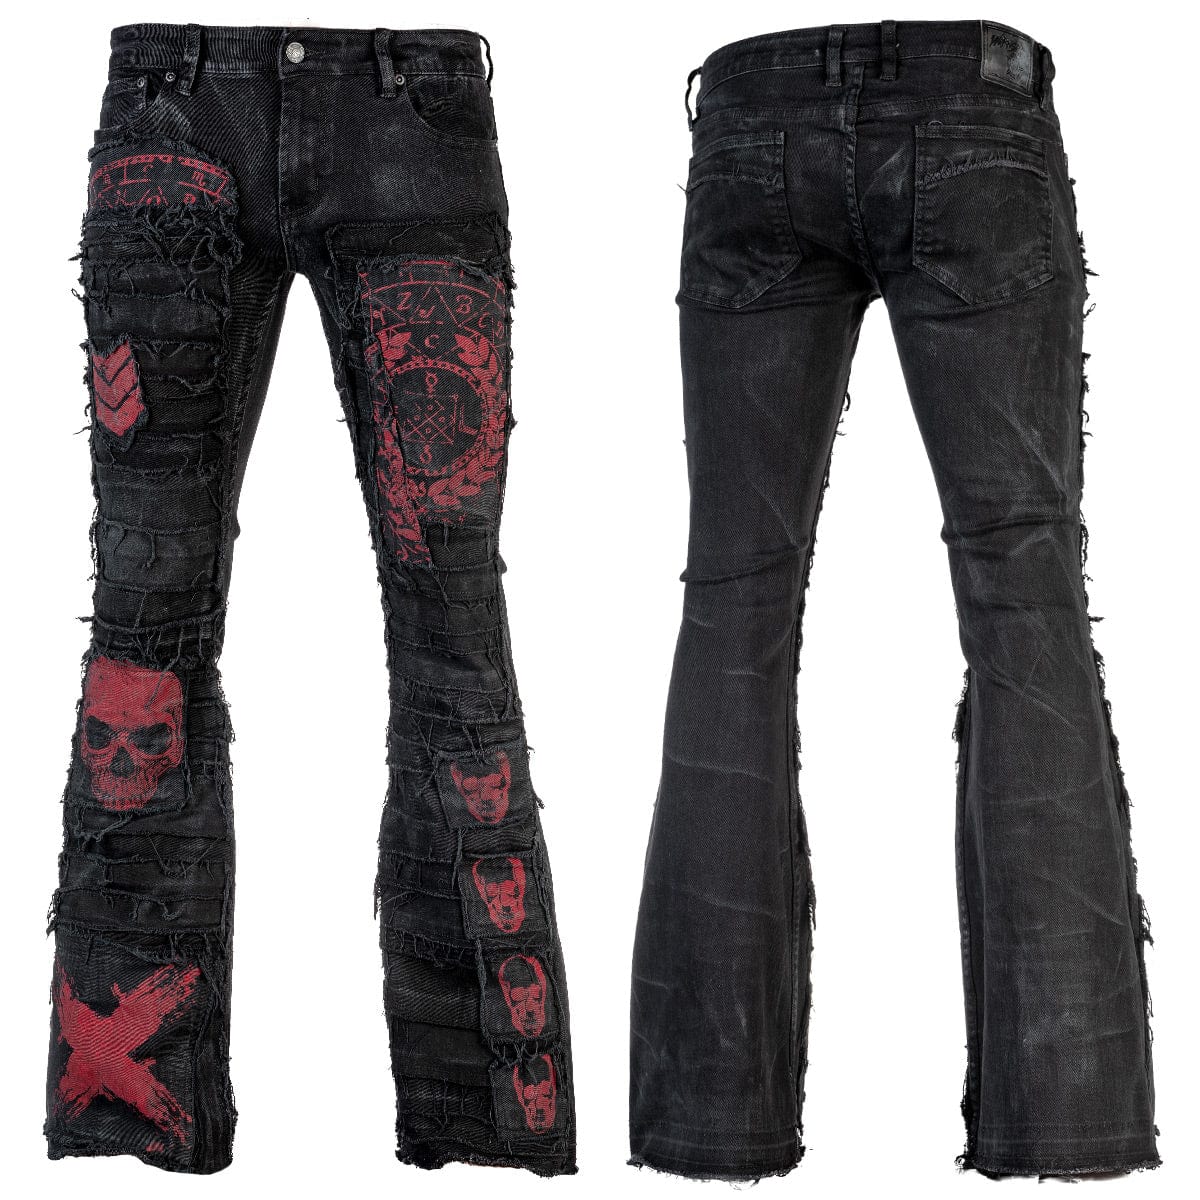 Rockstar Pants Denim - Darkstore - Order gothic fashion online or buy  directly in our shop in Berlin